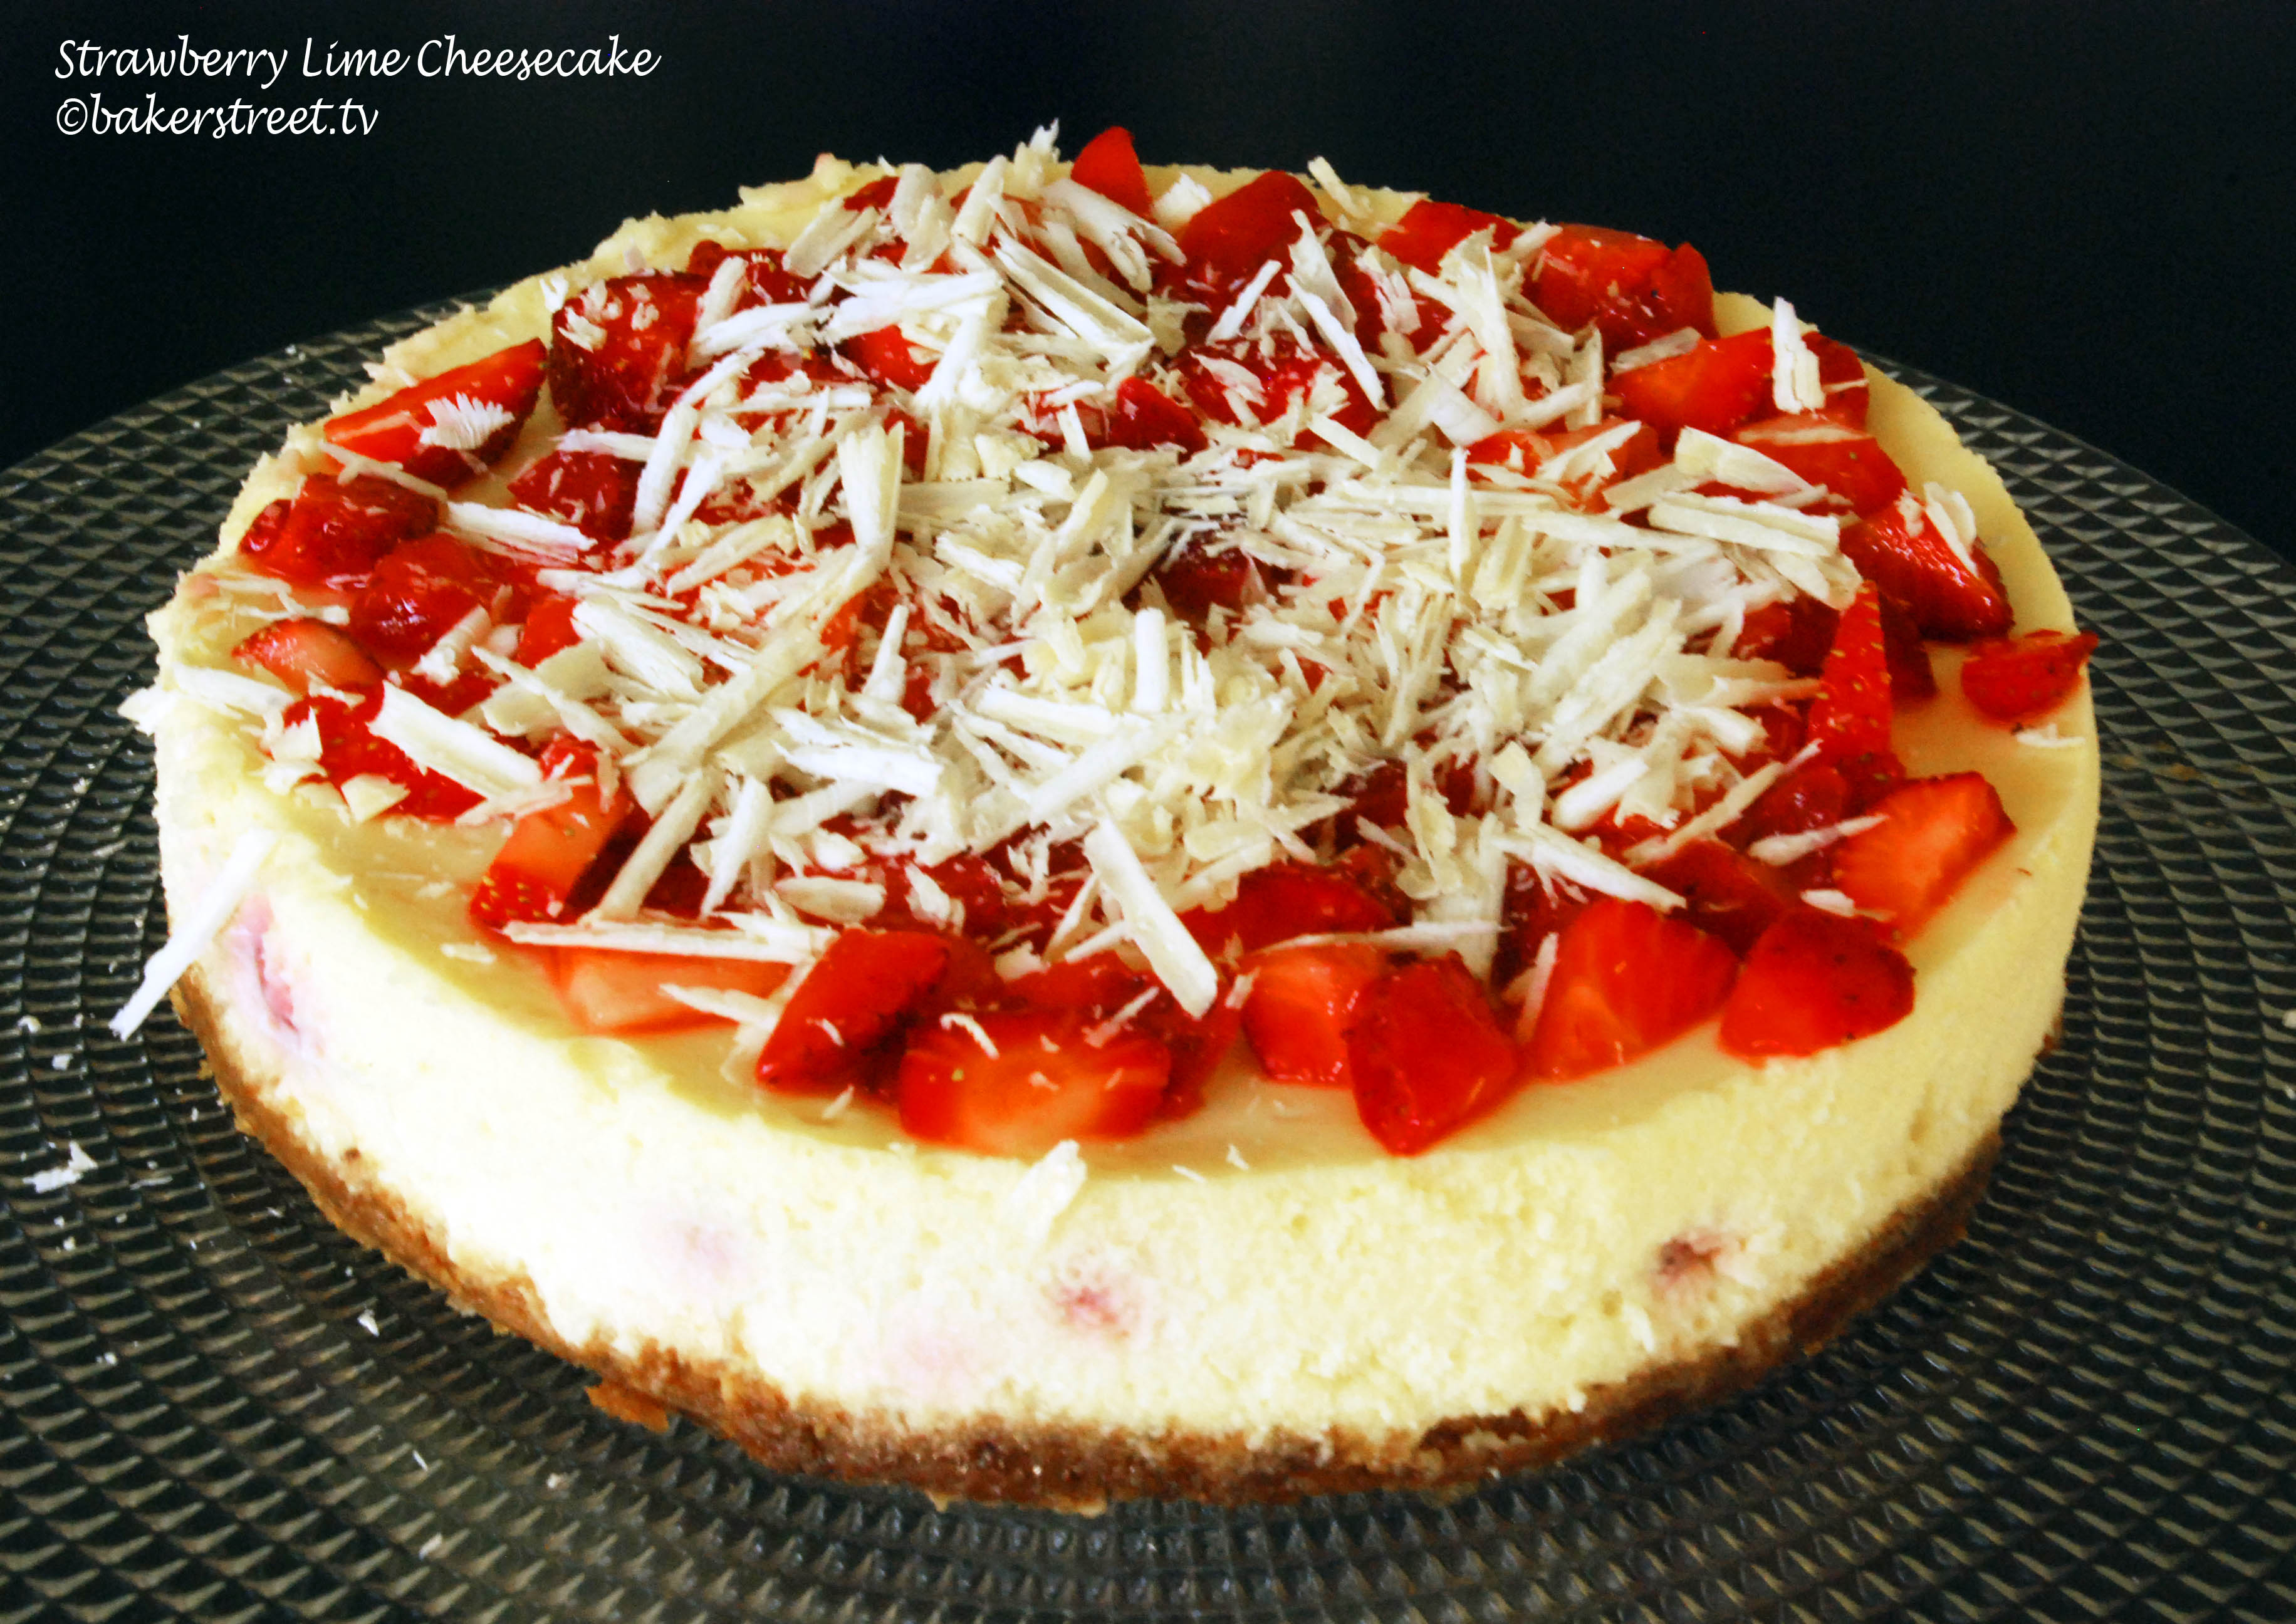 Strawberry Lime Cheesecake2